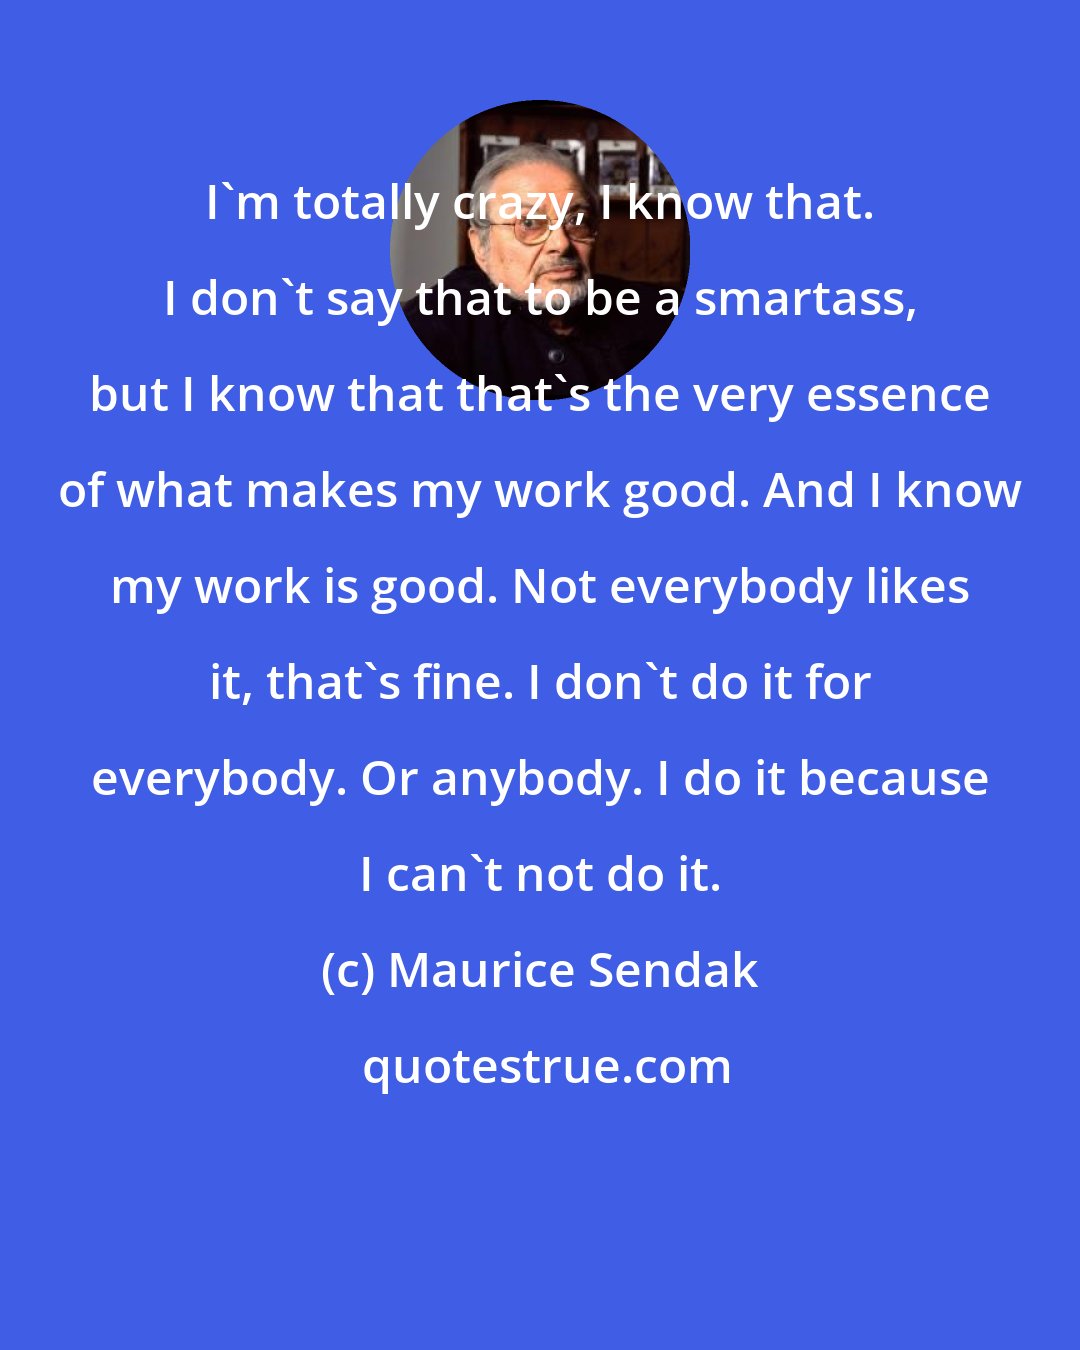 Maurice Sendak: I'm totally crazy, I know that. I don't say that to be a smartass, but I know that that's the very essence of what makes my work good. And I know my work is good. Not everybody likes it, that's fine. I don't do it for everybody. Or anybody. I do it because I can't not do it.